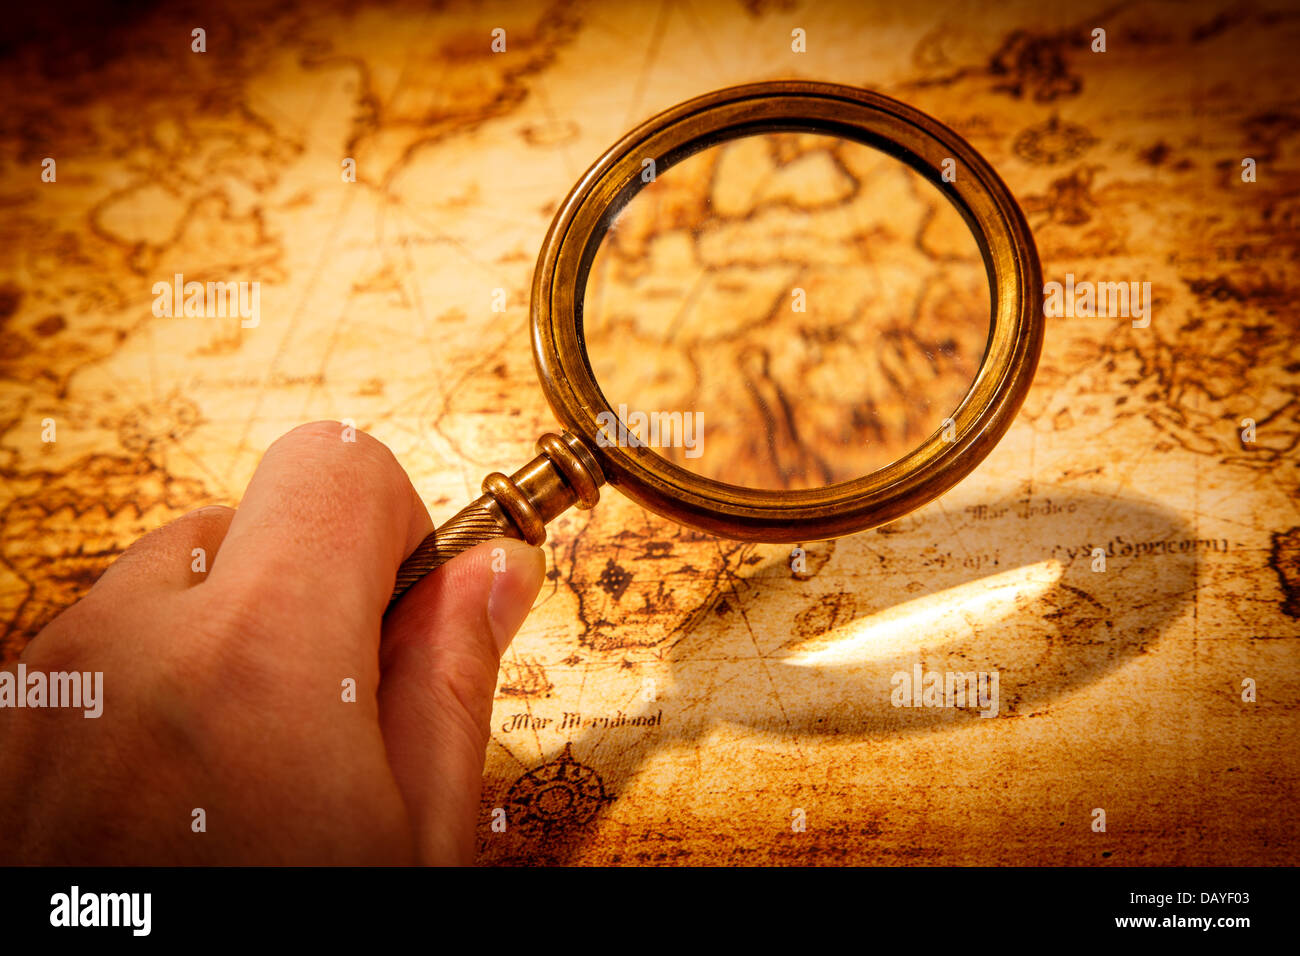 Vintage still life. Vintage magnifying glass lies on an ancient world map Stock Photo